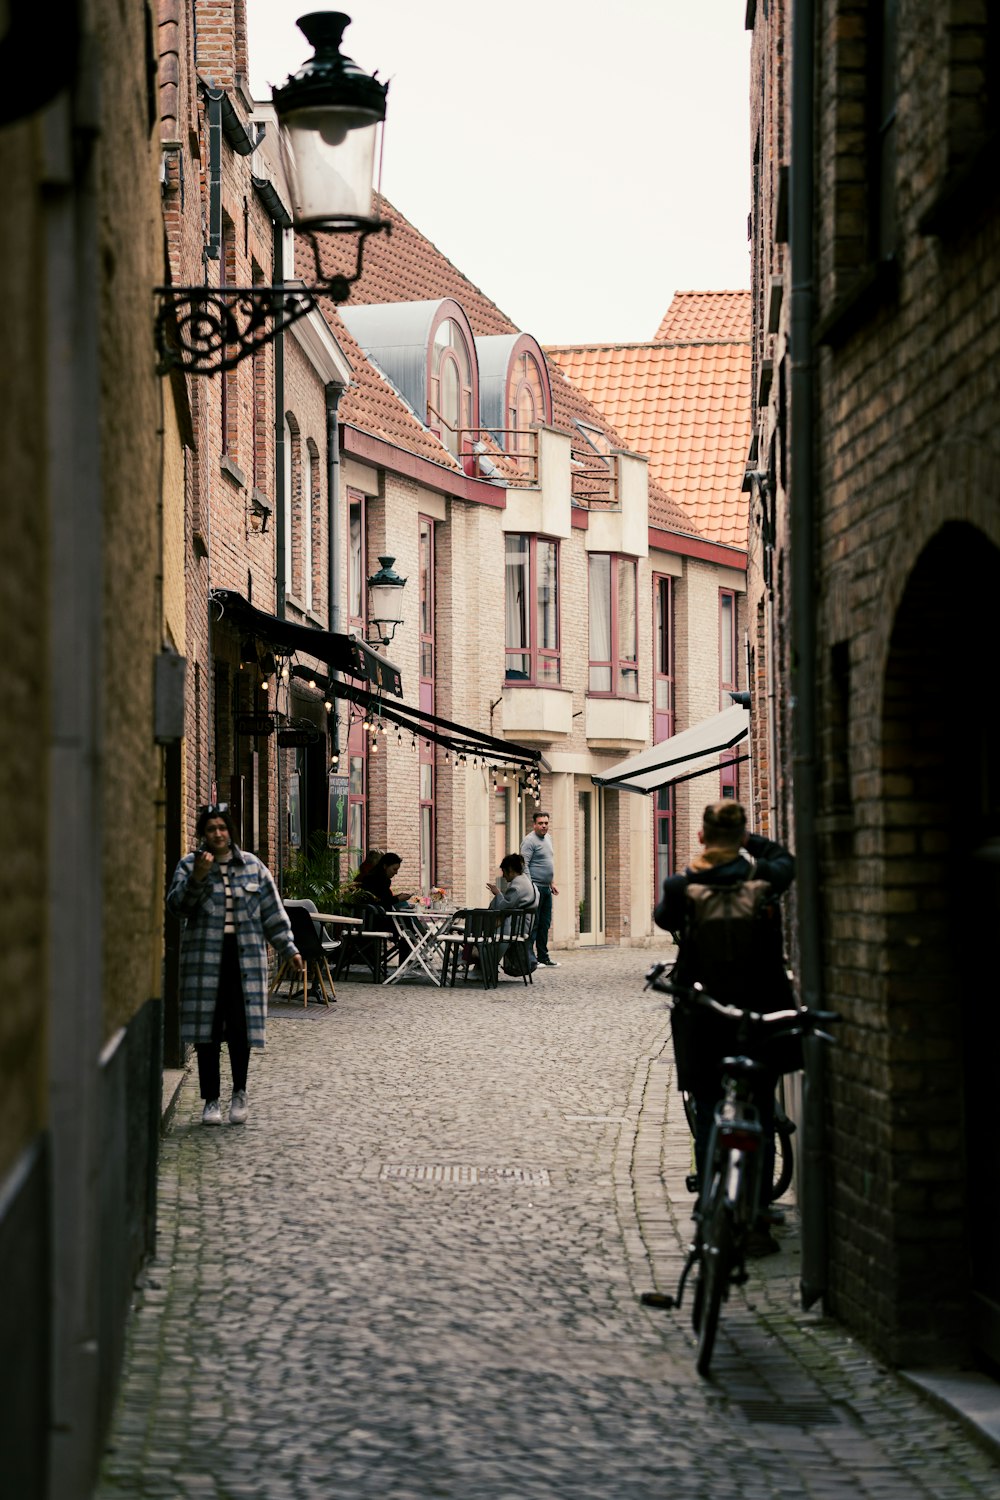 a person riding a bicycle down a cobblestone street